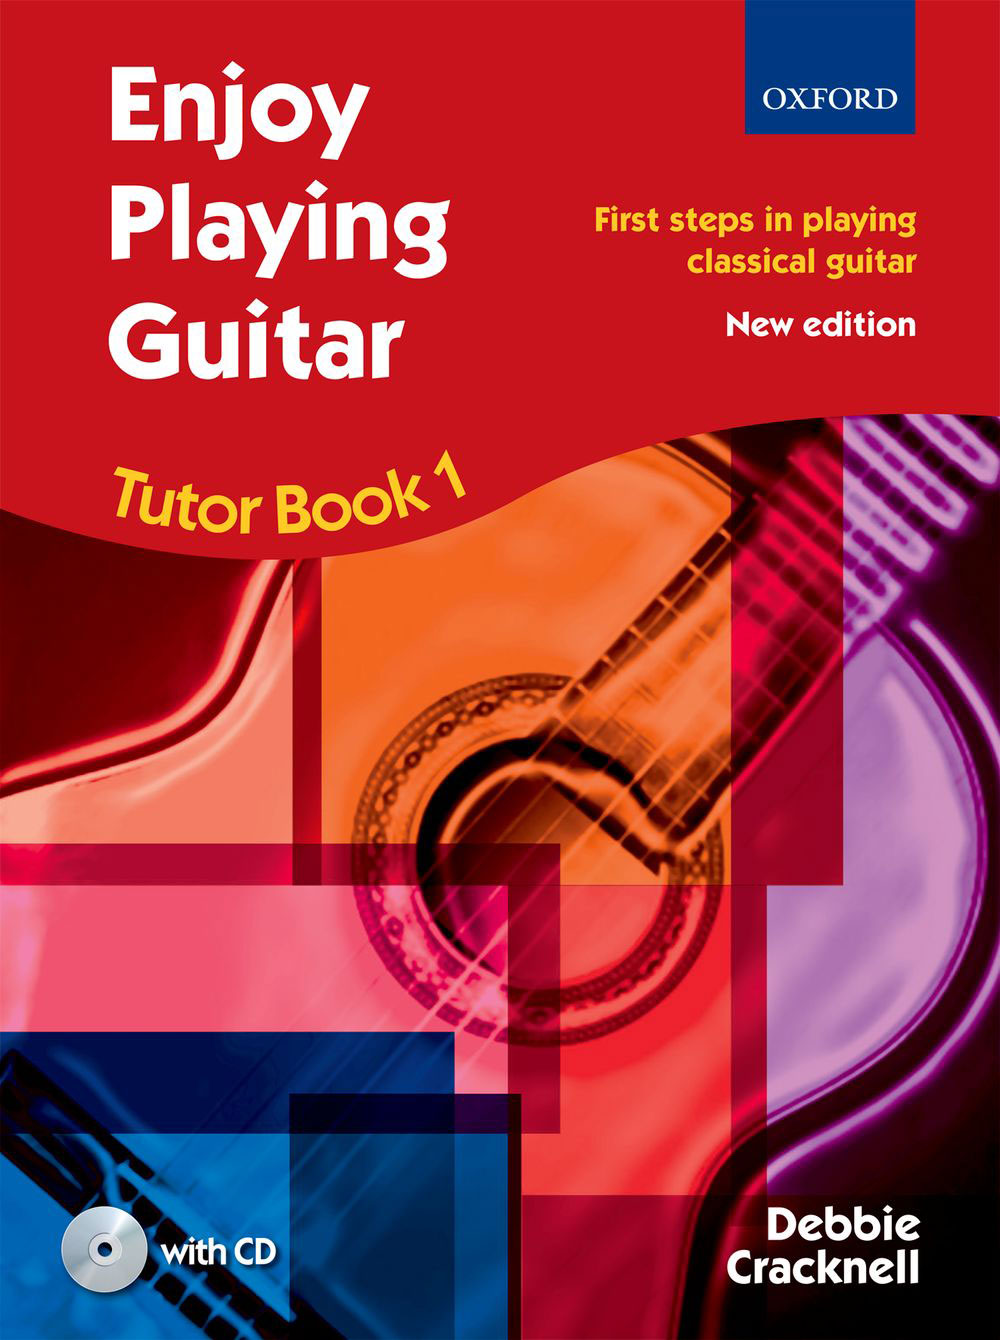 OXFORD UNIVERSITY PRESS CRACKNELL DEBBIE - ENJOY PLAYING THE GUITAR BOOK 1 NEW EDITION + CD - GUITARE